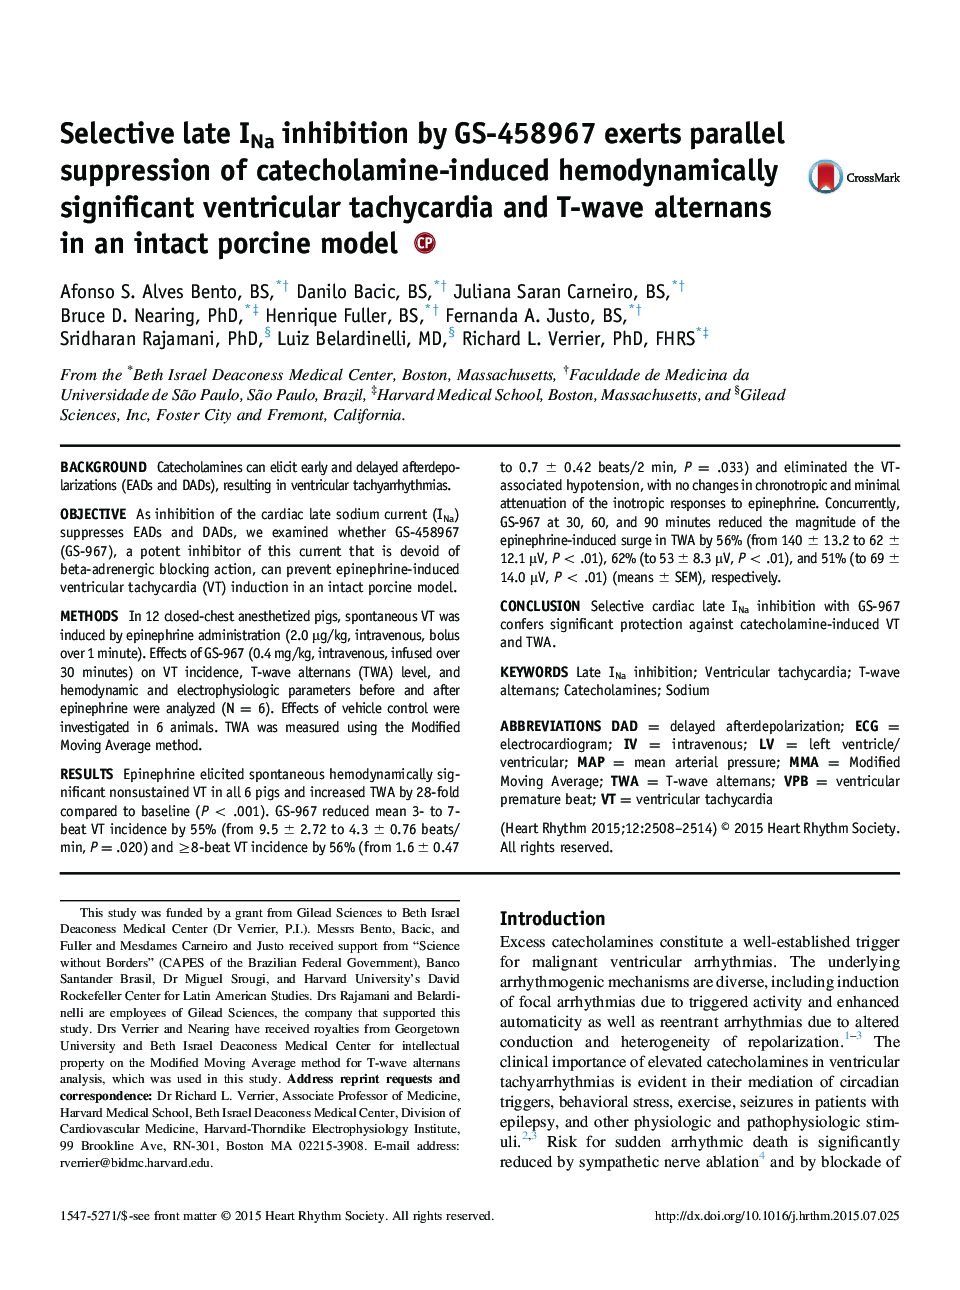 Selective late INa inhibition by GS-458967 exerts parallel suppression of catecholamine-induced hemodynamically significant ventricular tachycardia and T-wave alternans in an intact porcine model 